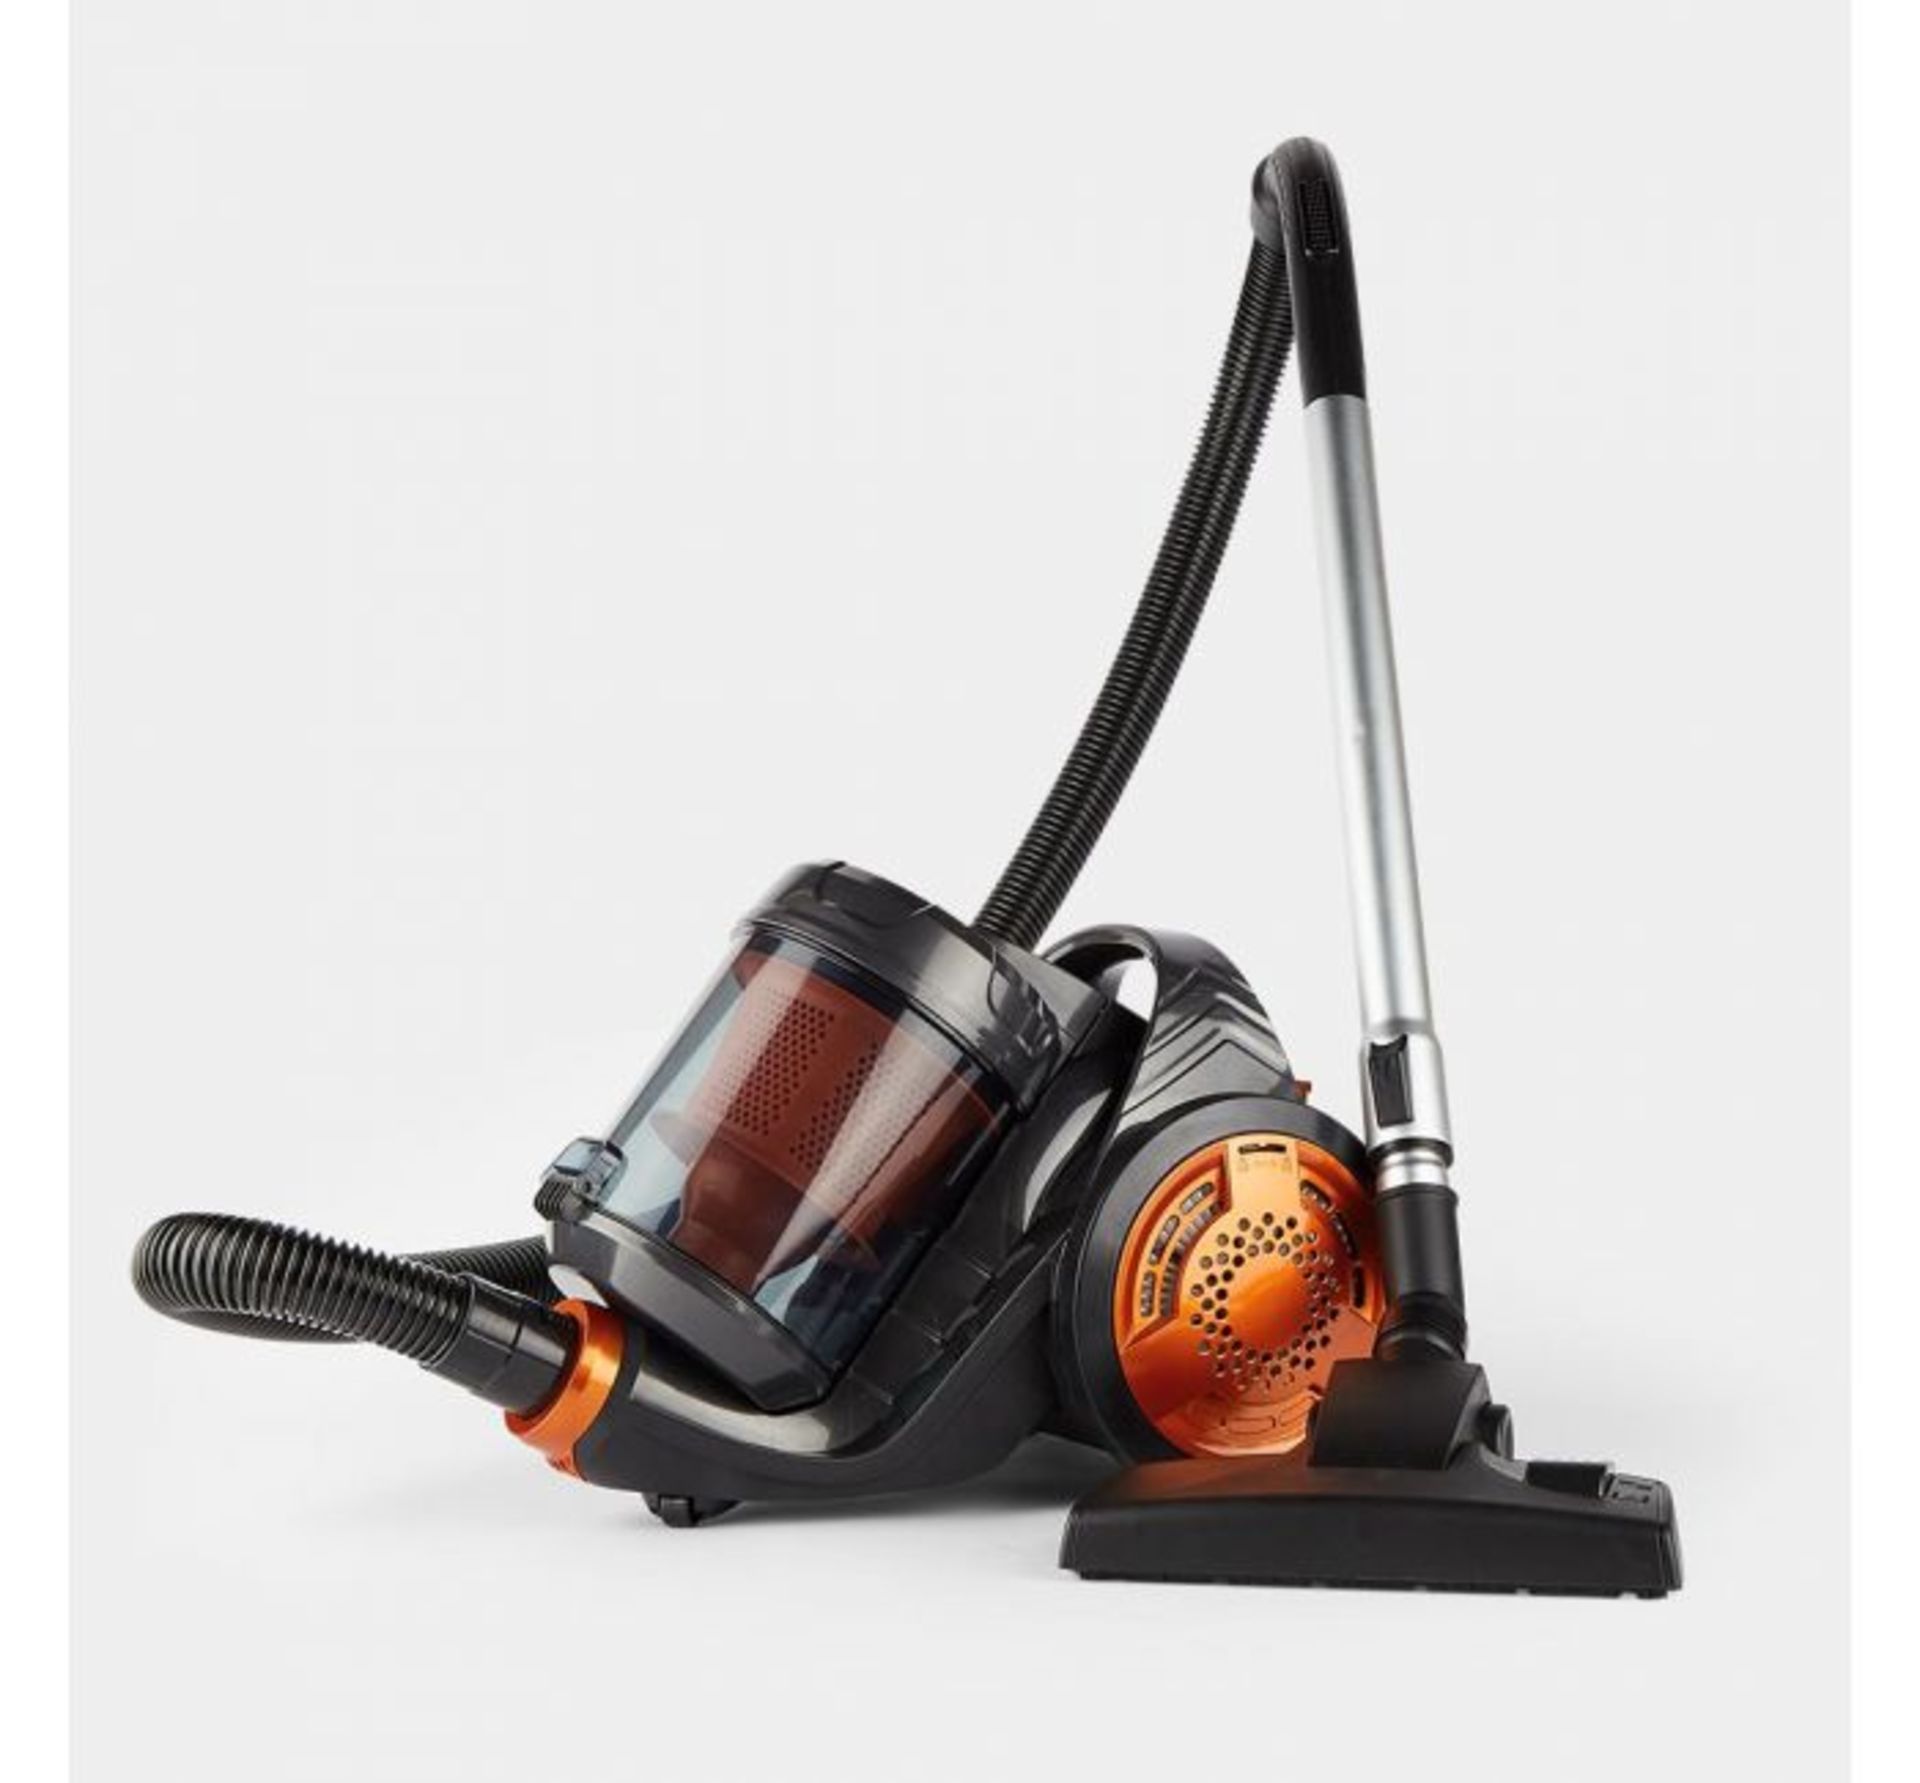 (OM119) 700W Bagless Vacuum 700W motor delivers powerful suction to lift dirt, dust and crumbs... - Image 2 of 2